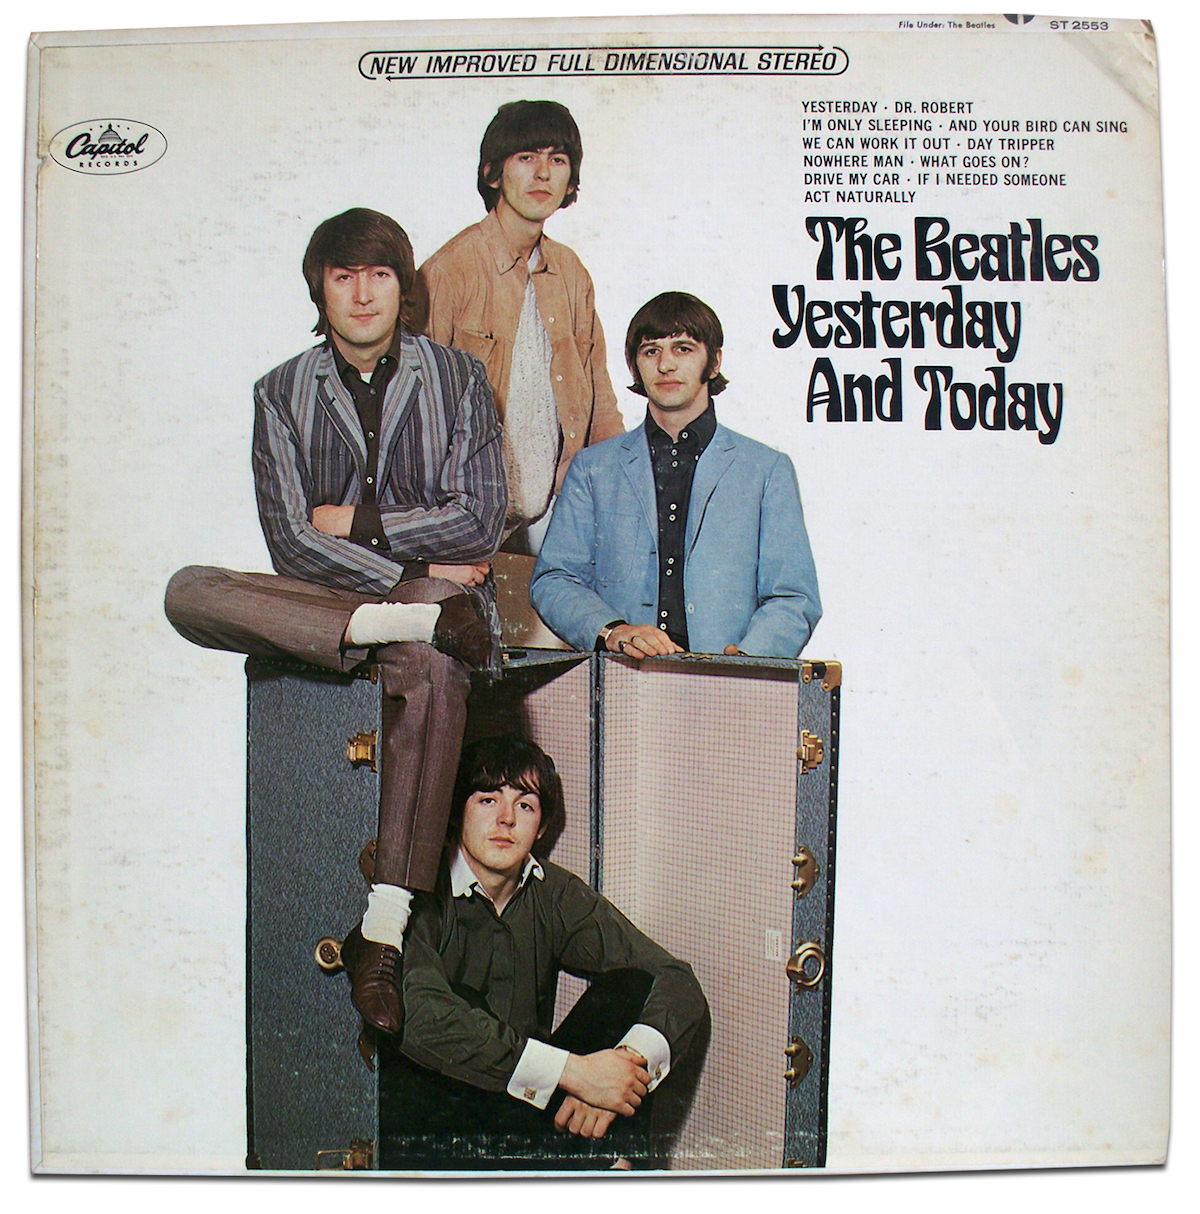 YESTERDAY AND TODAY THE BEATLES ЦЕНА: $45-85 ТЫС. ГОД ИЗДАНИЯ: 1966